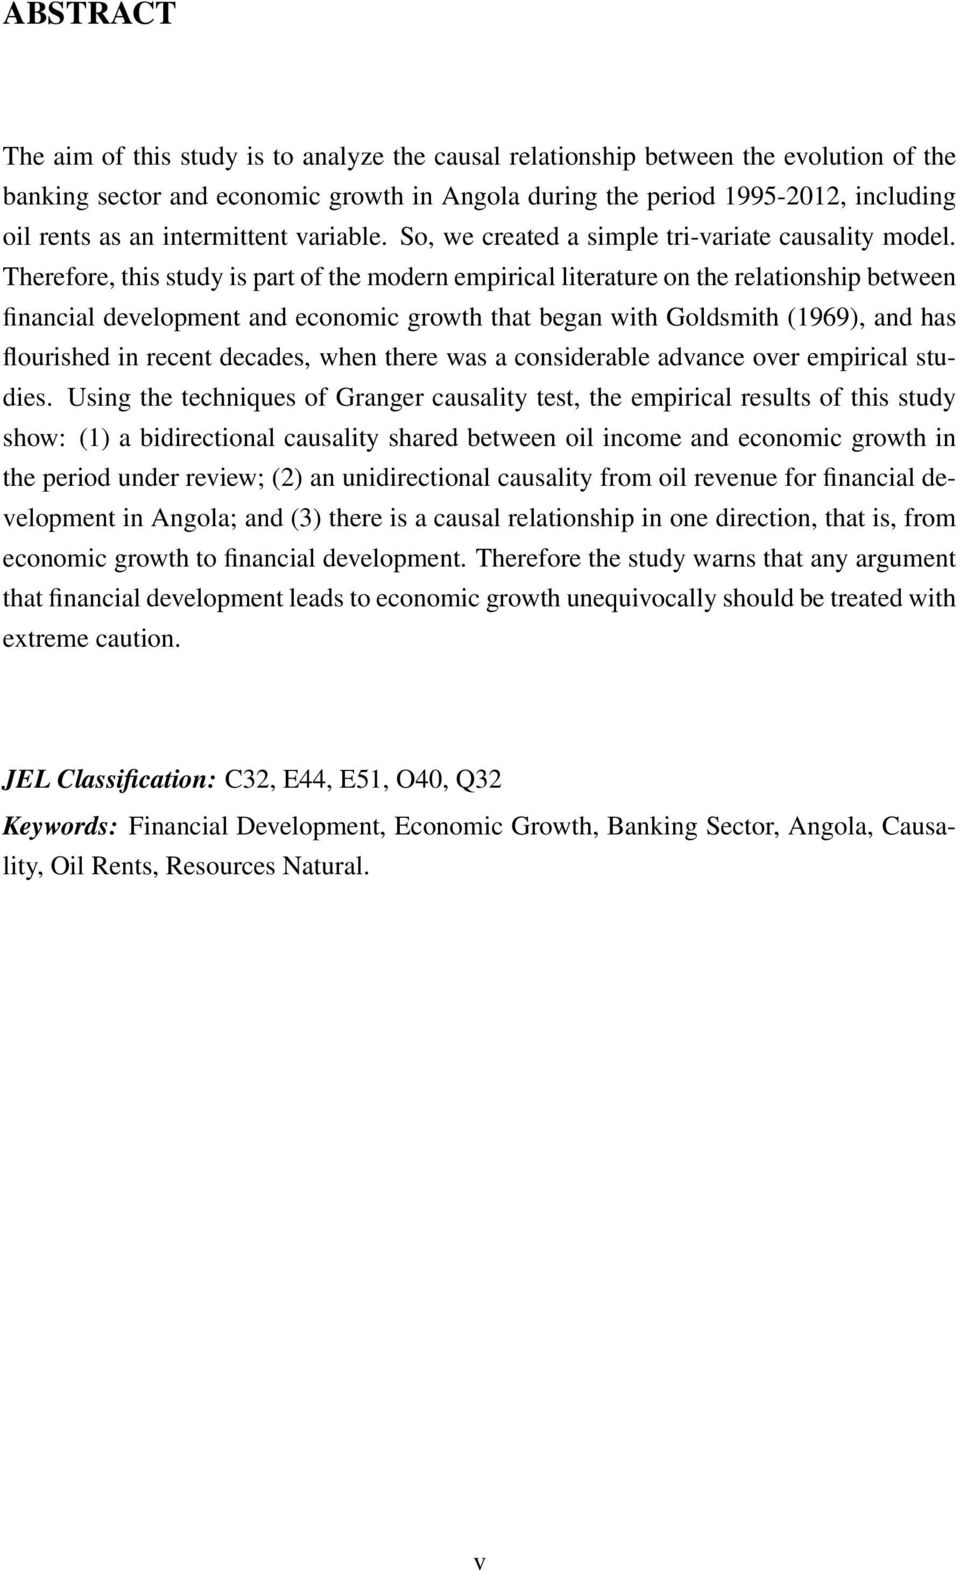 Therefore, this study is part of the modern empirical literature on the relationship between financial development and economic growth that began with Goldsmith (1969), and has flourished in recent